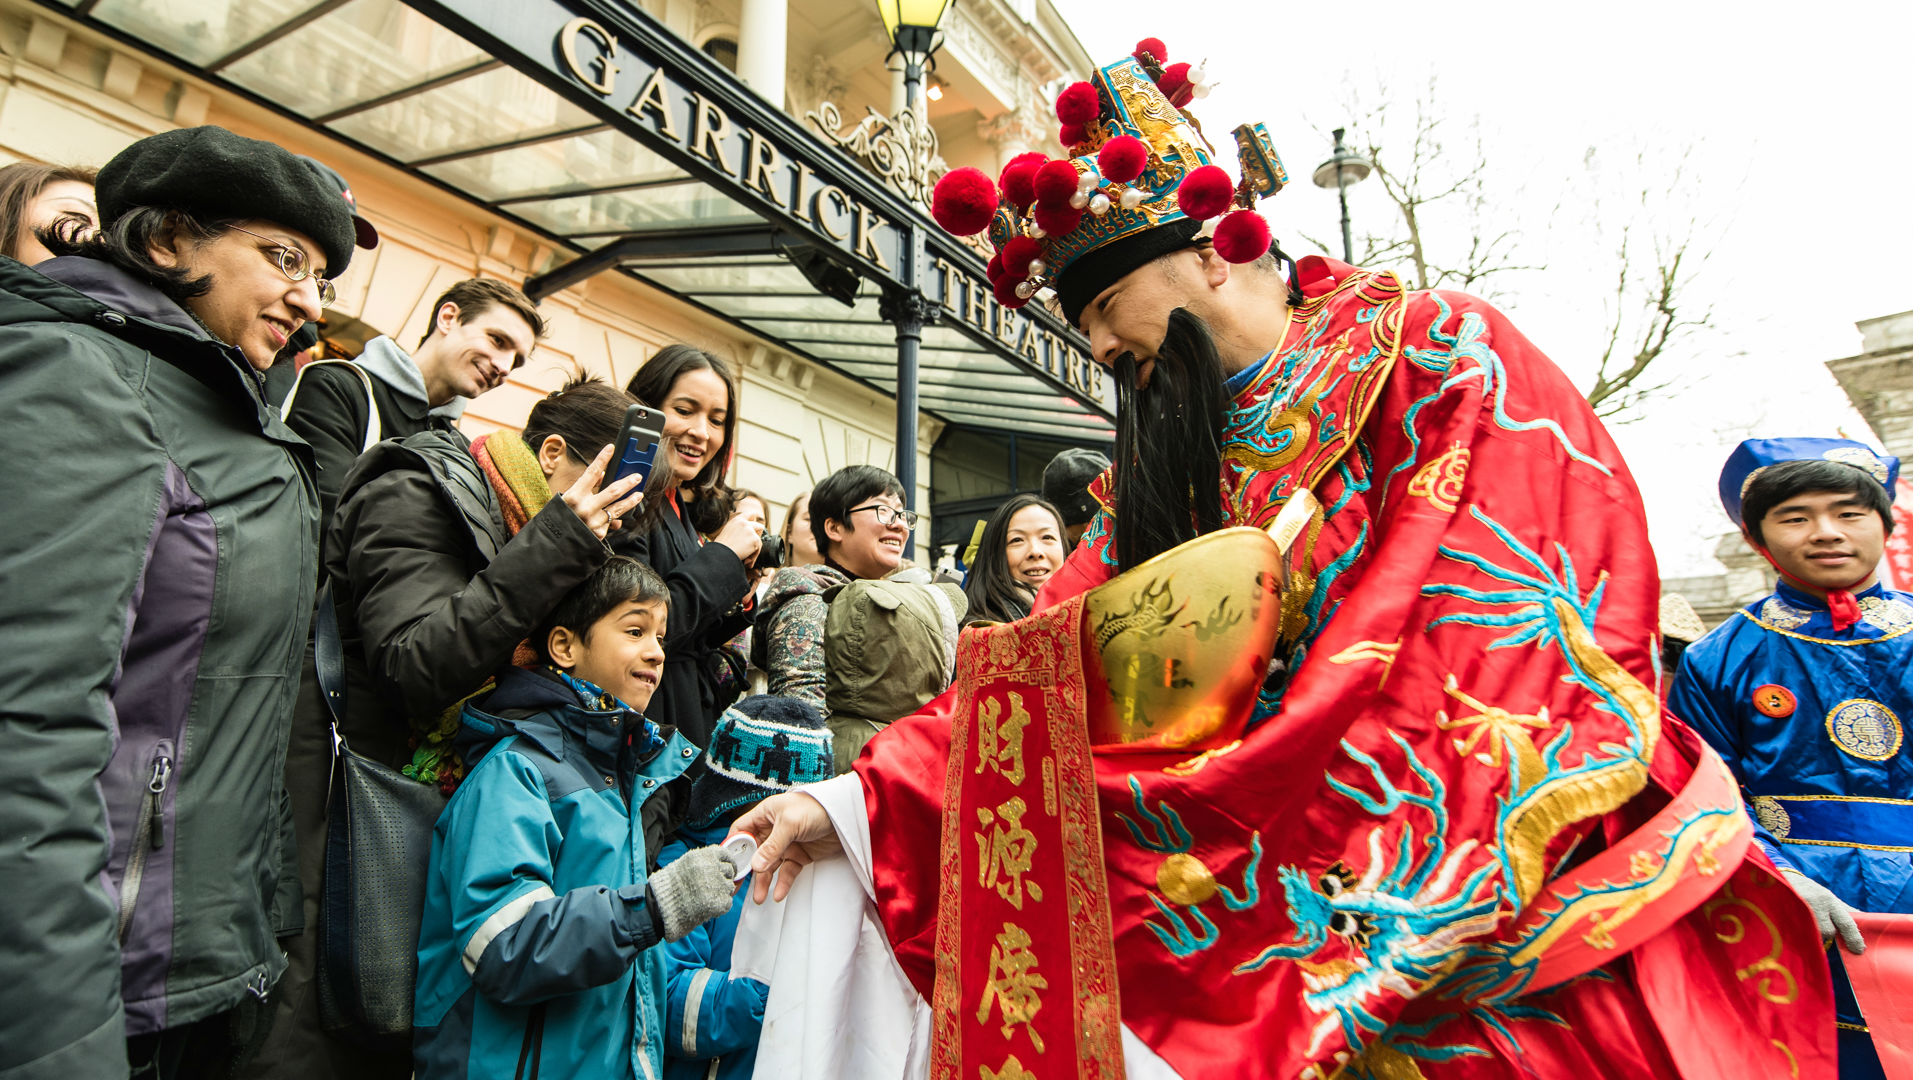 About Chinese New Year in London - visitlondon.com